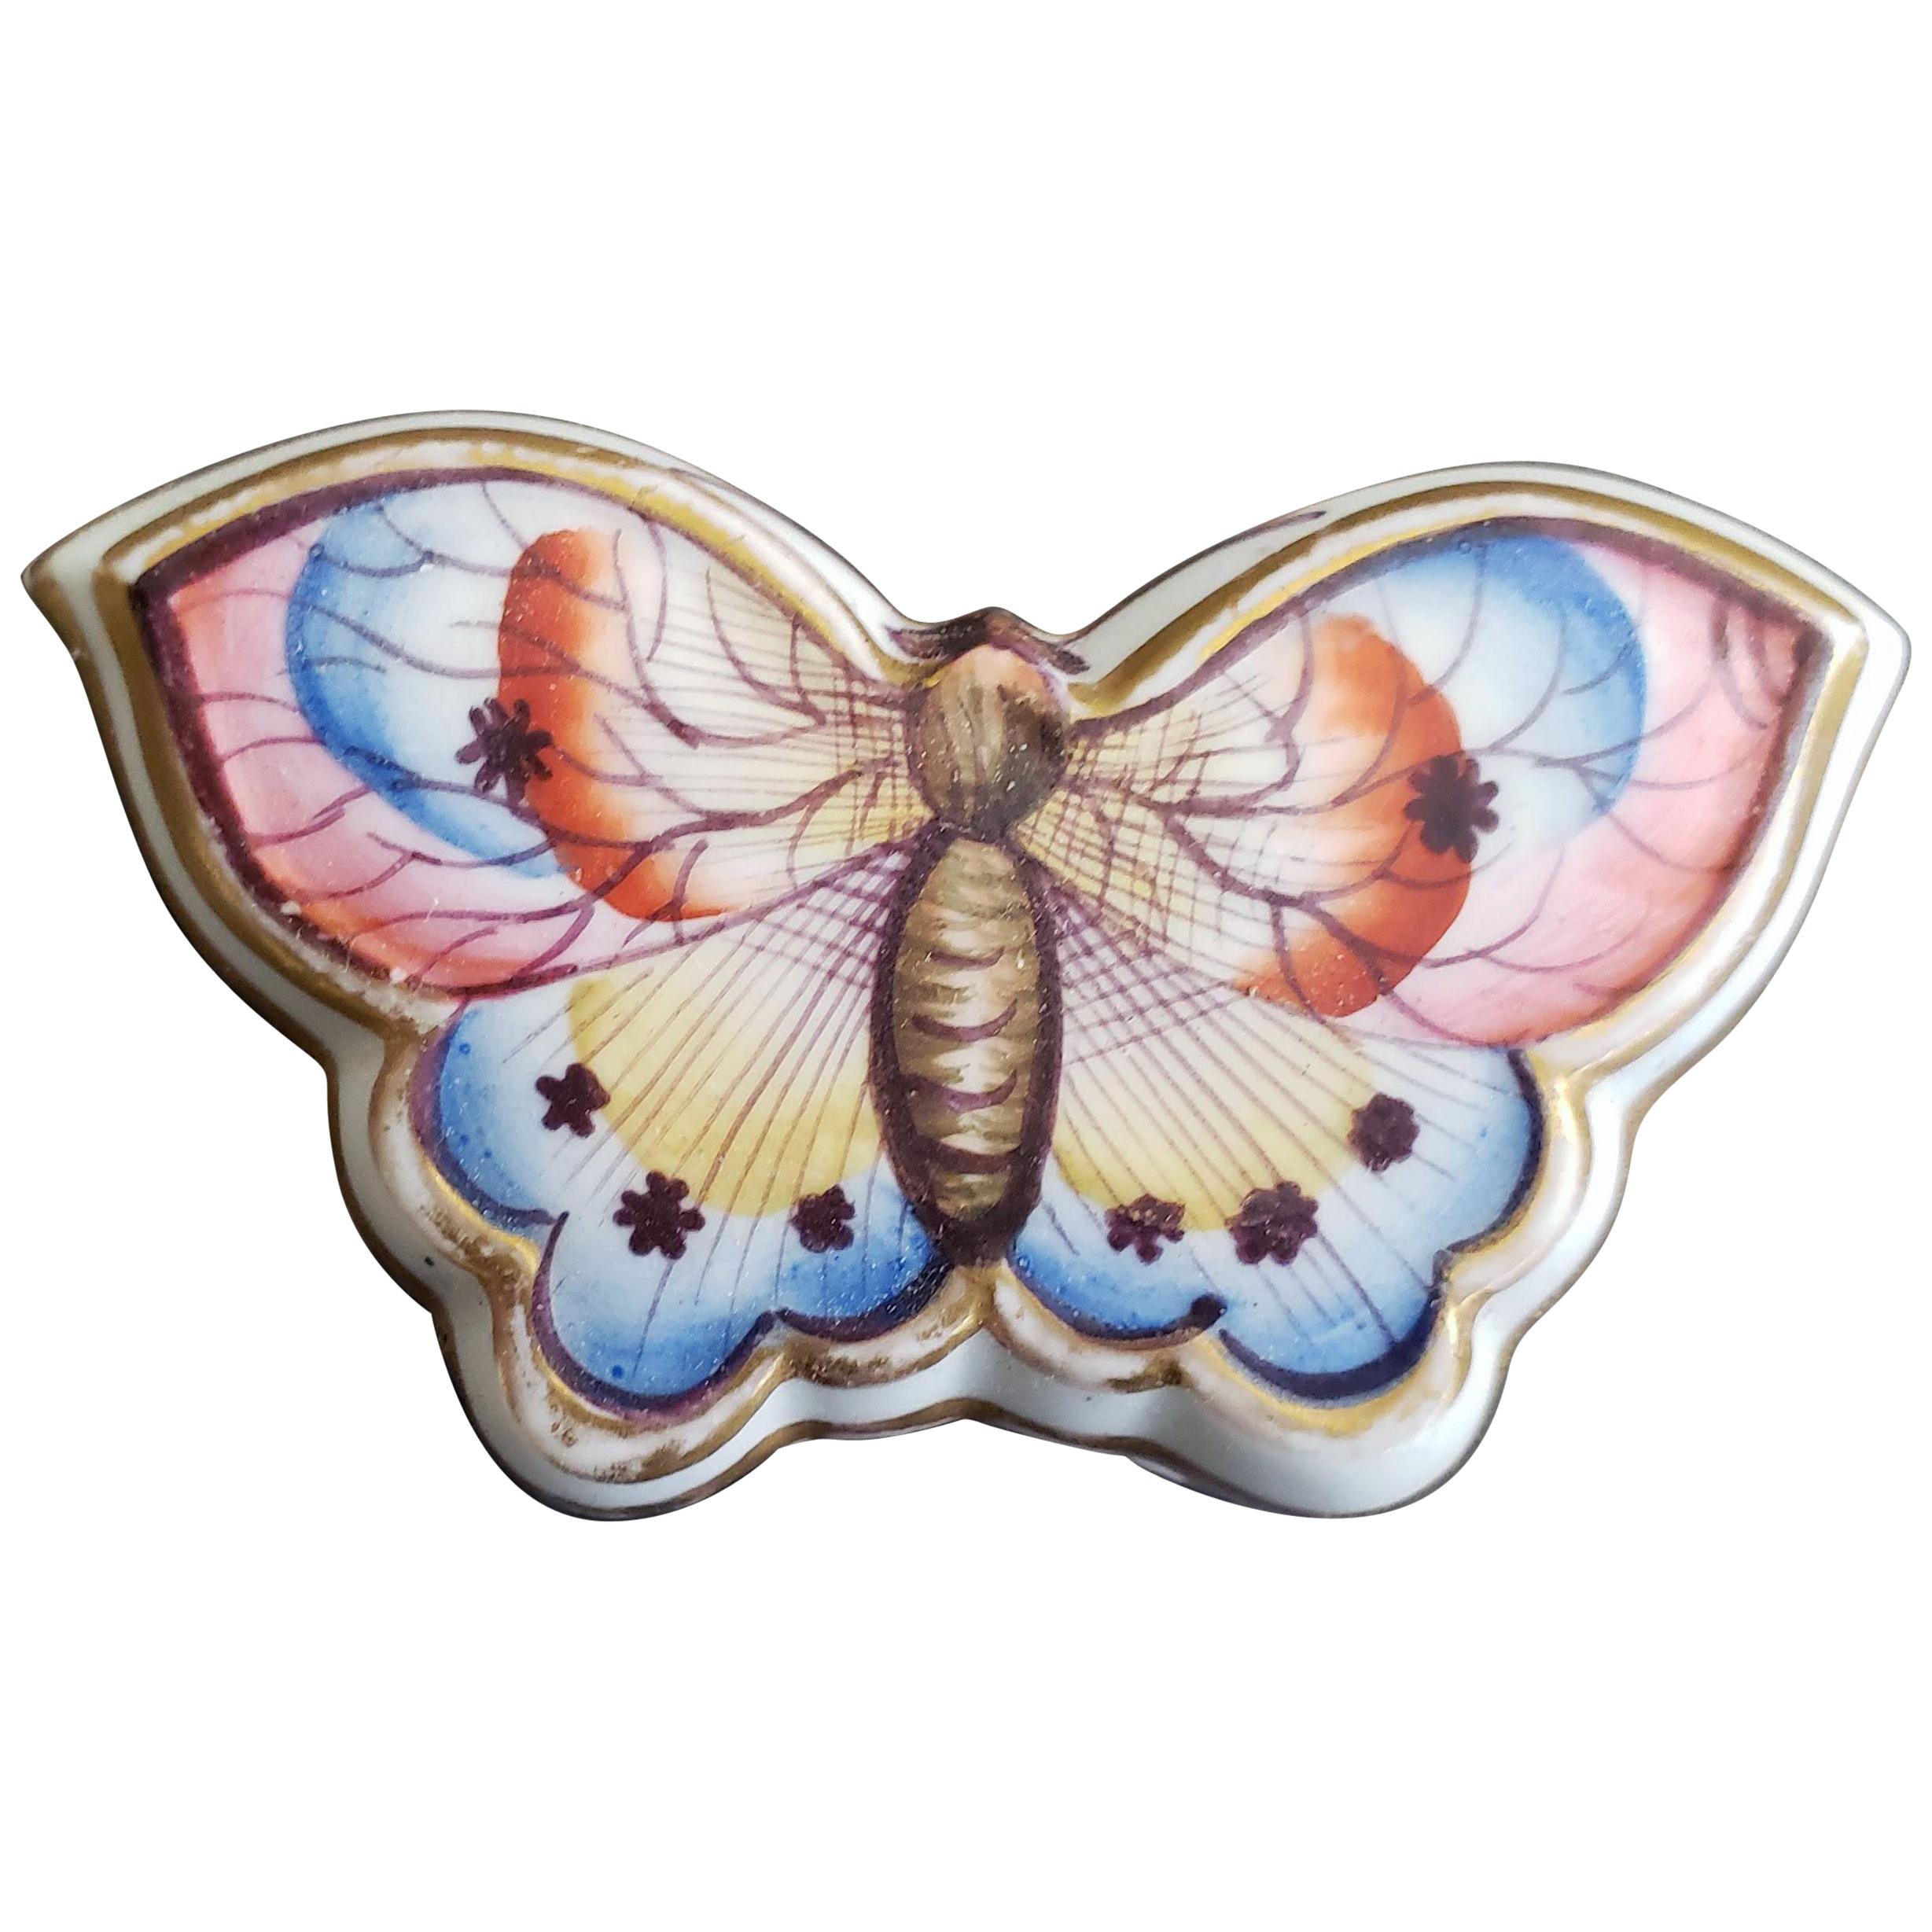 Antique Porcelain Spode Double Sided Butterfly Box and Cover, circa 1810-1830